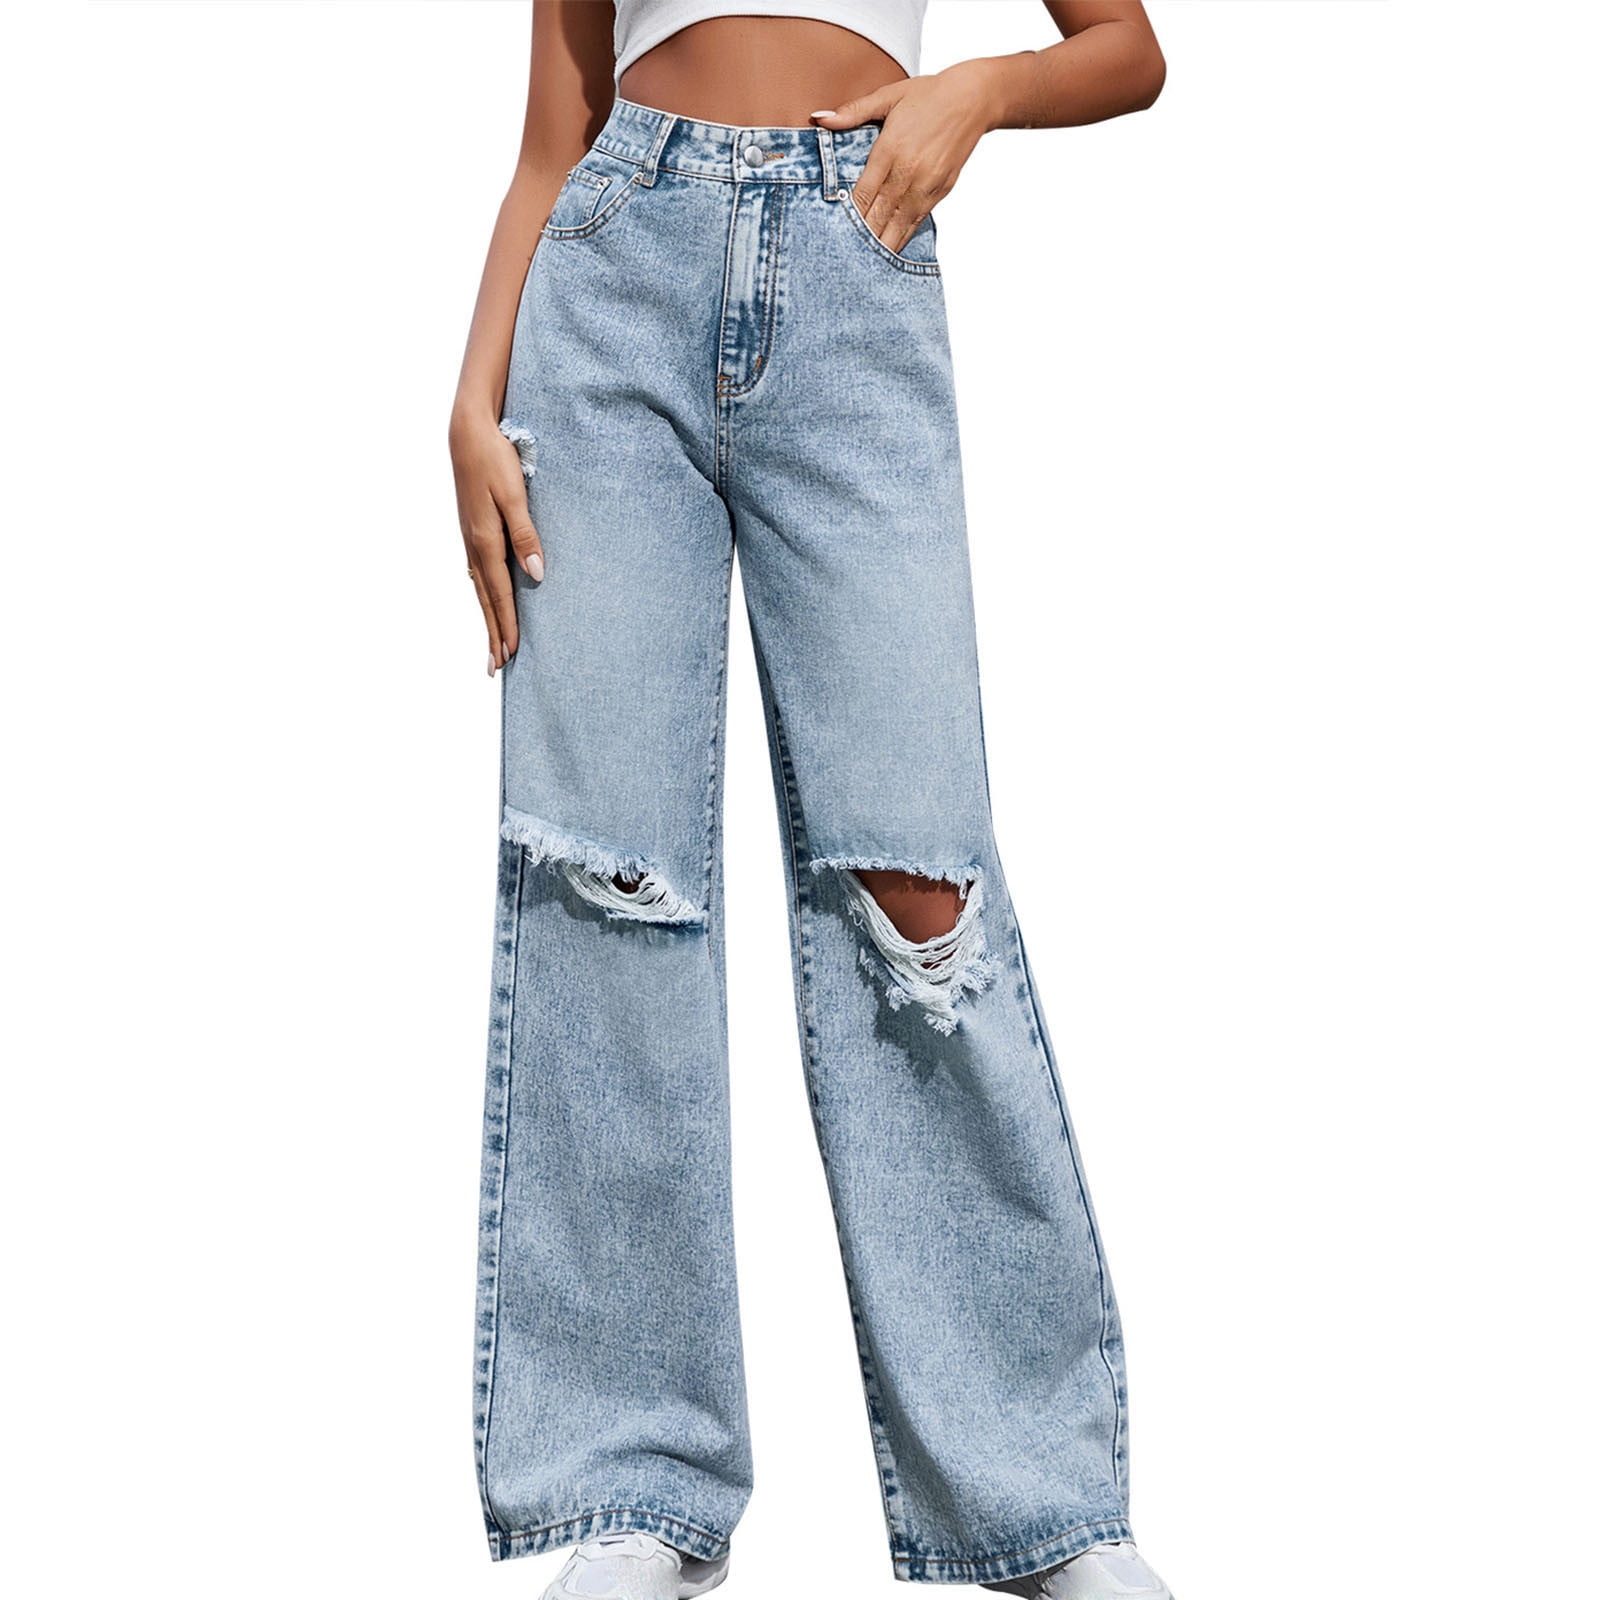 YYDGH Baggy Jeans for Women High Waisted Wide Leg Denim Pants